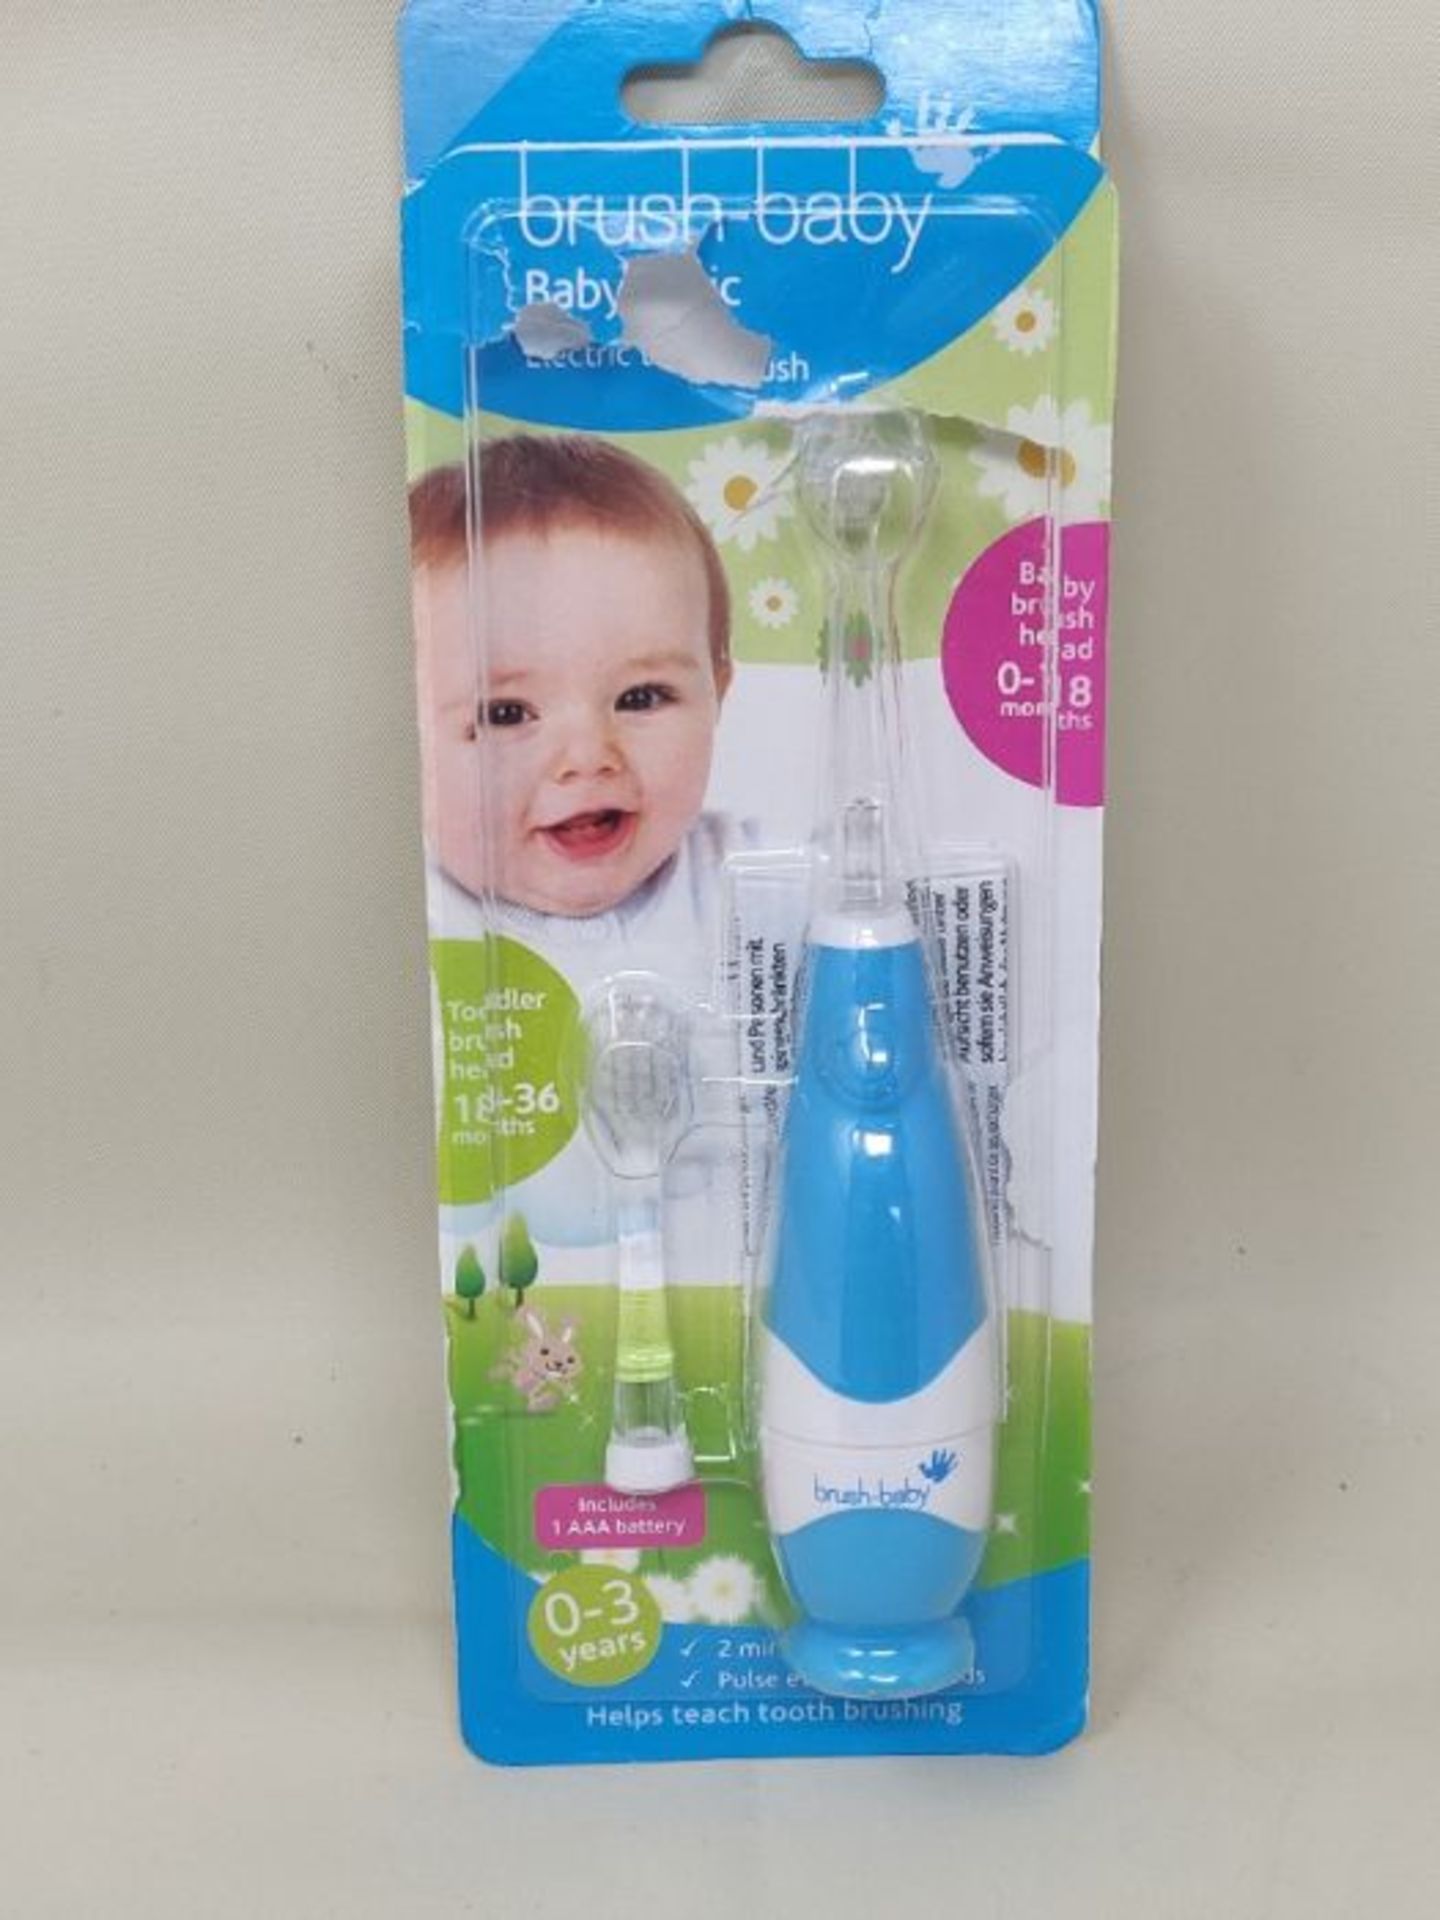 Brush-Baby BabySonic Electric Toothbrush for Babies & Toddlers | Stage 2-First Teeth | - Image 2 of 2